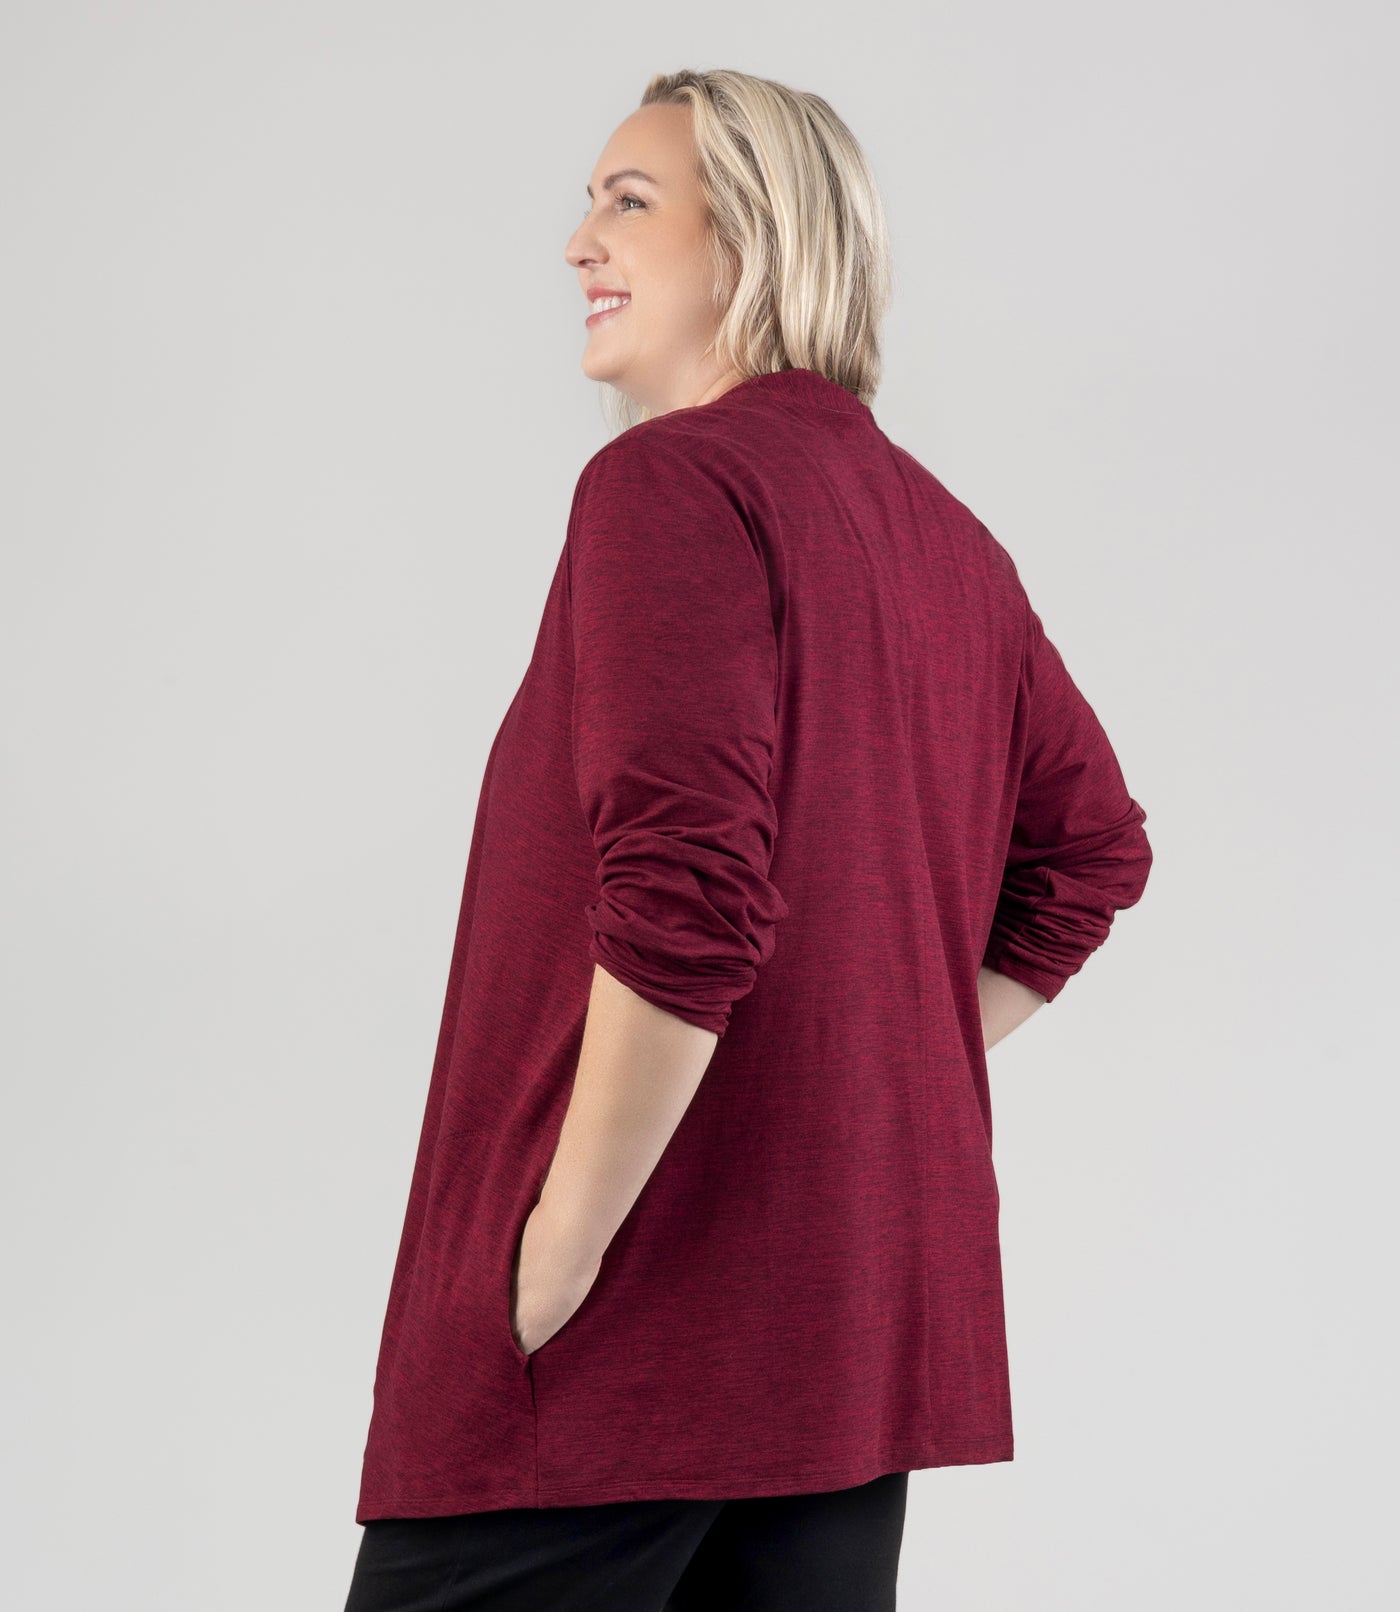 JunoActive Model, facing back, wearing SoftSupreme Cardigan in Heather Cranberry. Sleeves rolled up to elbows and hands in pockets of cardigan.